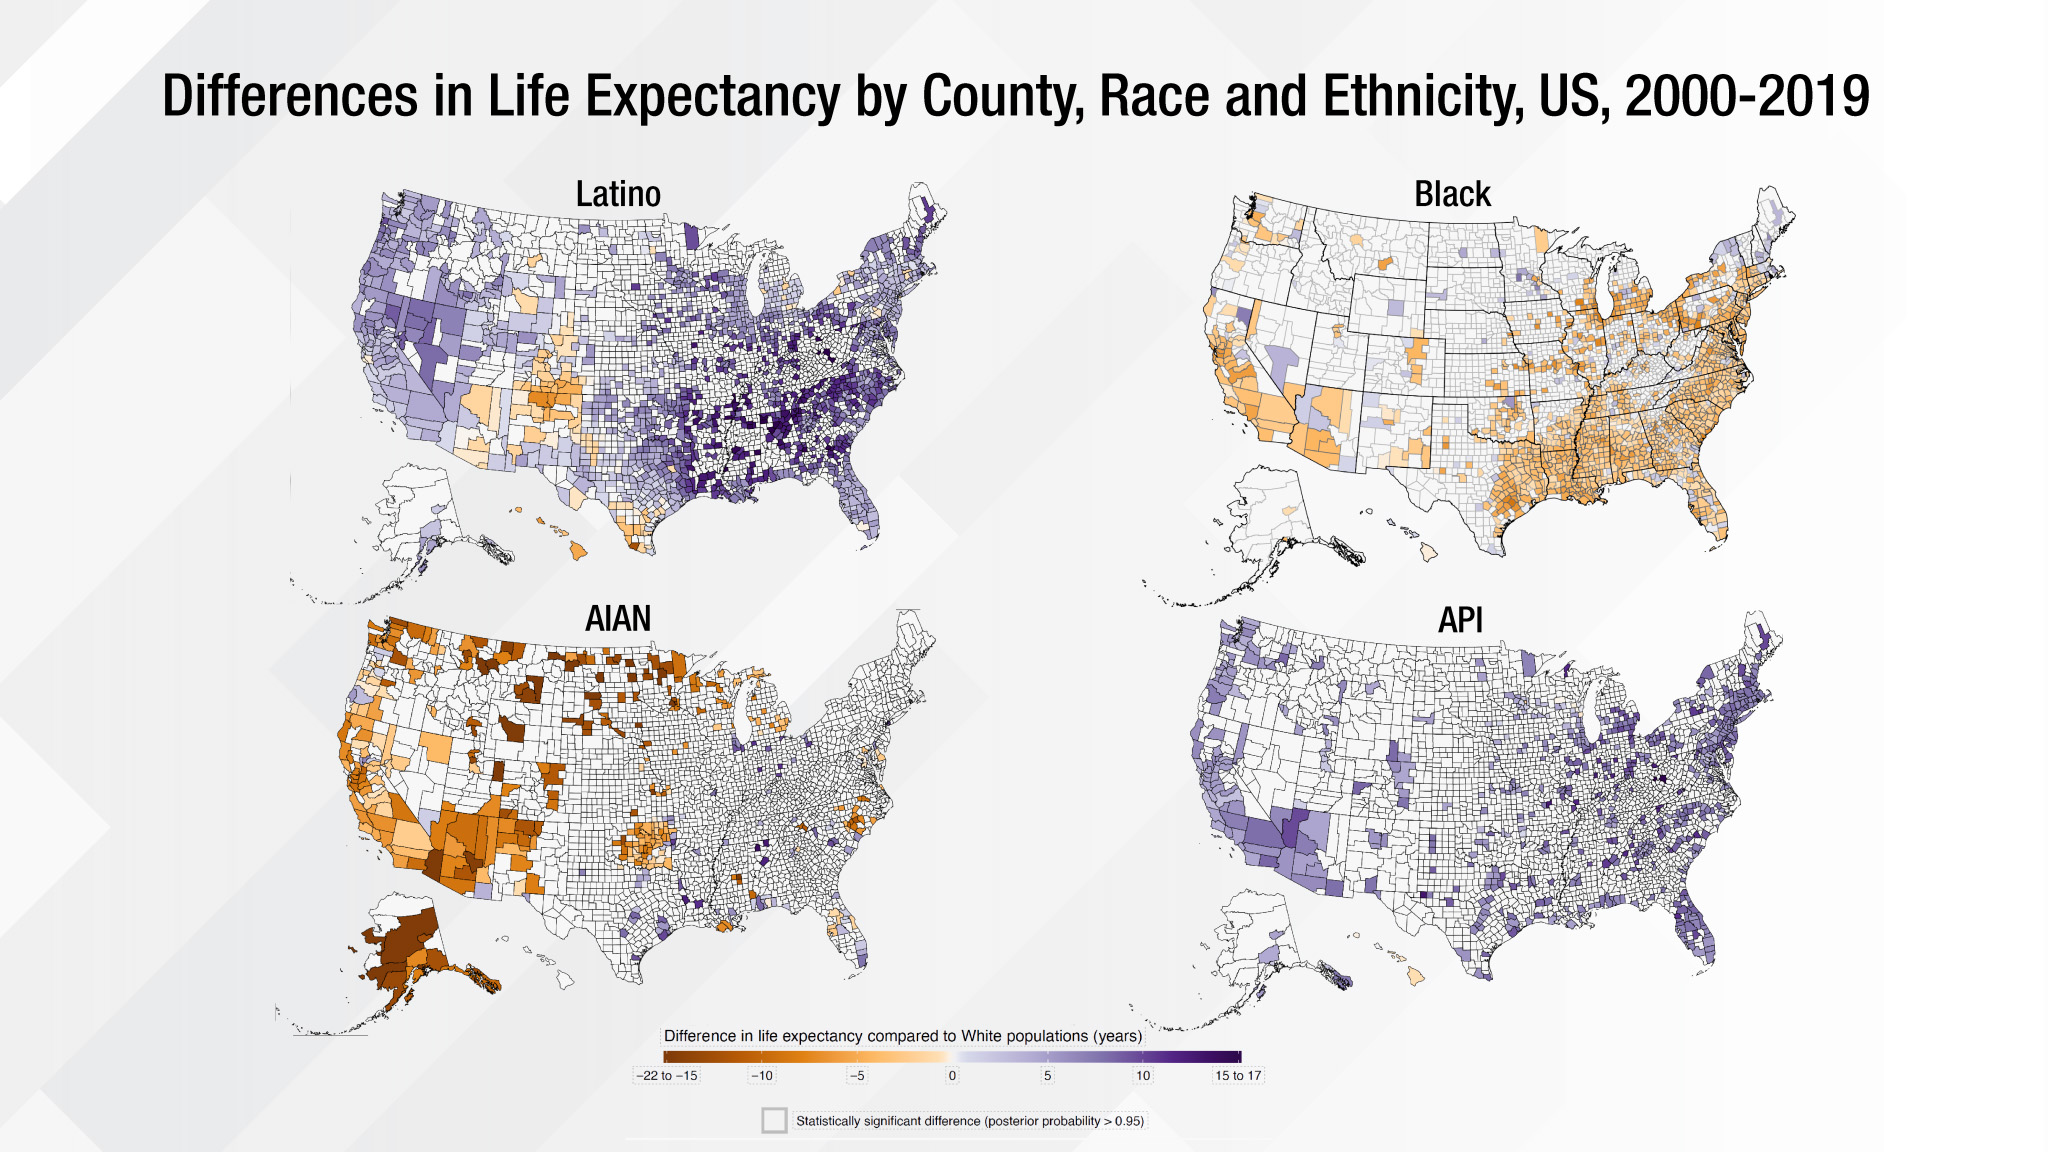 Image of 4 US maps describing differences in life expectancy by county, race, and ethnicity, from 2000-2019